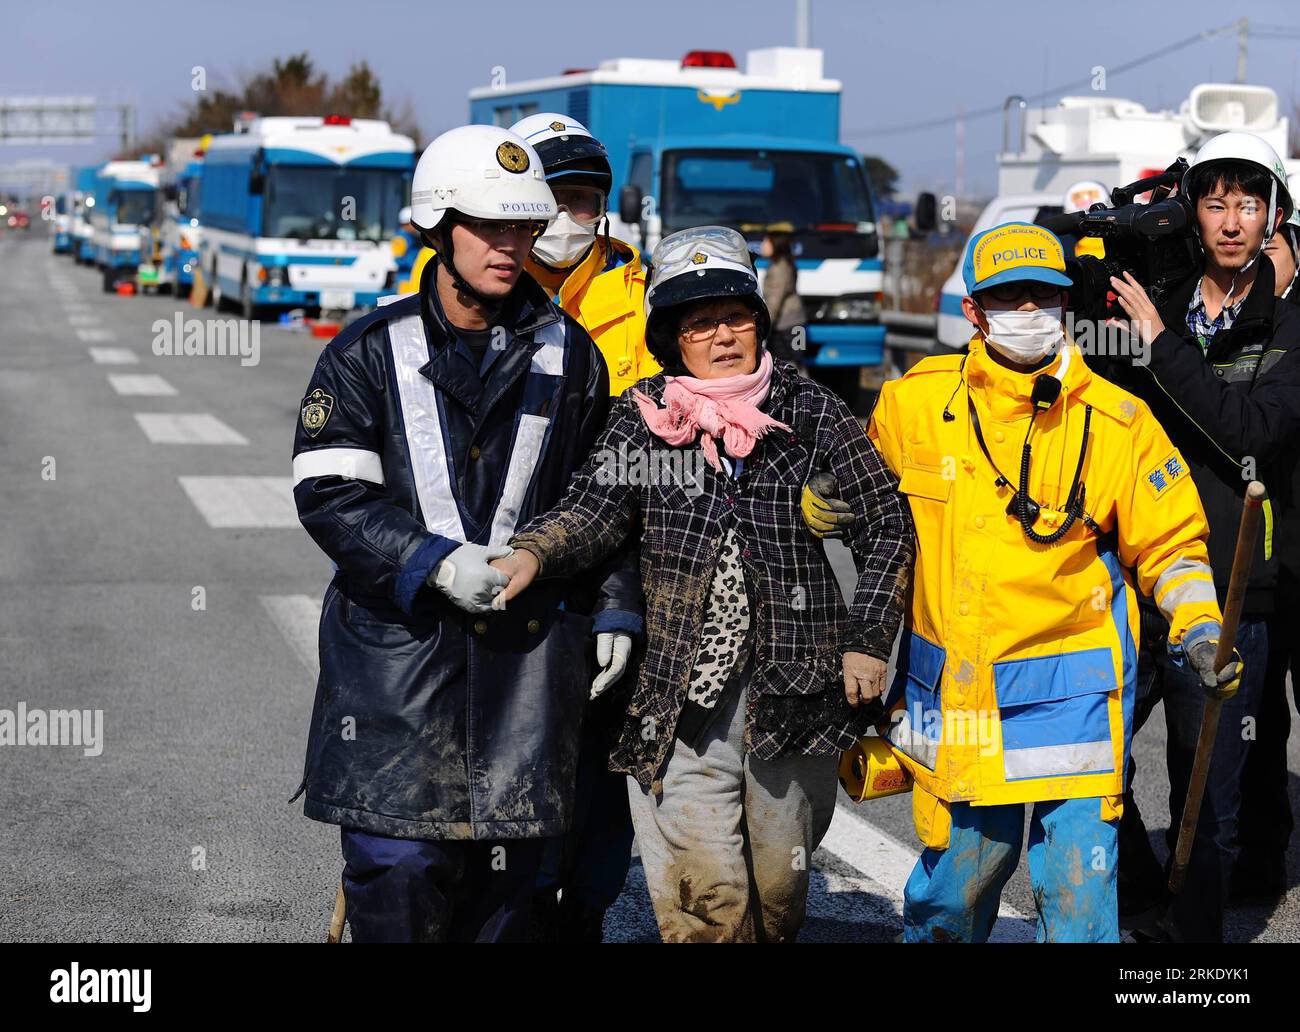 Bildnummer: 55019318  Datum: 13.03.2011  Copyright: imago/Xinhua SENDAI, March 13, 2011 (Xinhua) -- Rescuers save a survivor at Sanbontsuka of Wakabayashi in Sendai City, Miyagi Prefecture, Japan, March 13, 2011. The area lost contact with the outside world after Friday s quake and tsunami. Friday s catastrophic earthquake in Japan and the following devastating tsunami have ravaged the country, while massive rescue and recovery efforts have been quickly launched to save lives and minimize losses. (Xinhua/Ji Chunpeng)(yc) JAPAN-QUAKE PUBLICATIONxNOTxINxCHN Gesellschaft Naturkatastrophe Erdbeben Stock Photo